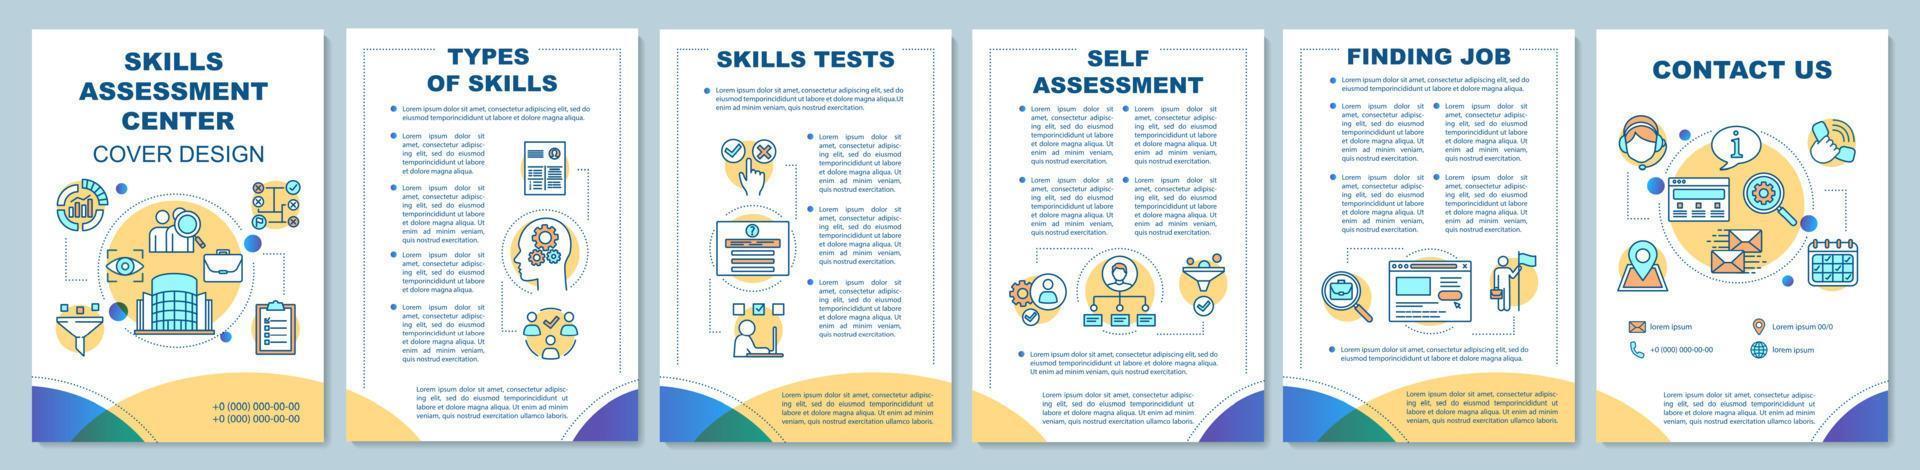 Skills assessment center brochure template layout. Flyer, booklet, leaflet print design with linear icons. Employee qualification vector page layouts for magazines, annual reports, advertising posters